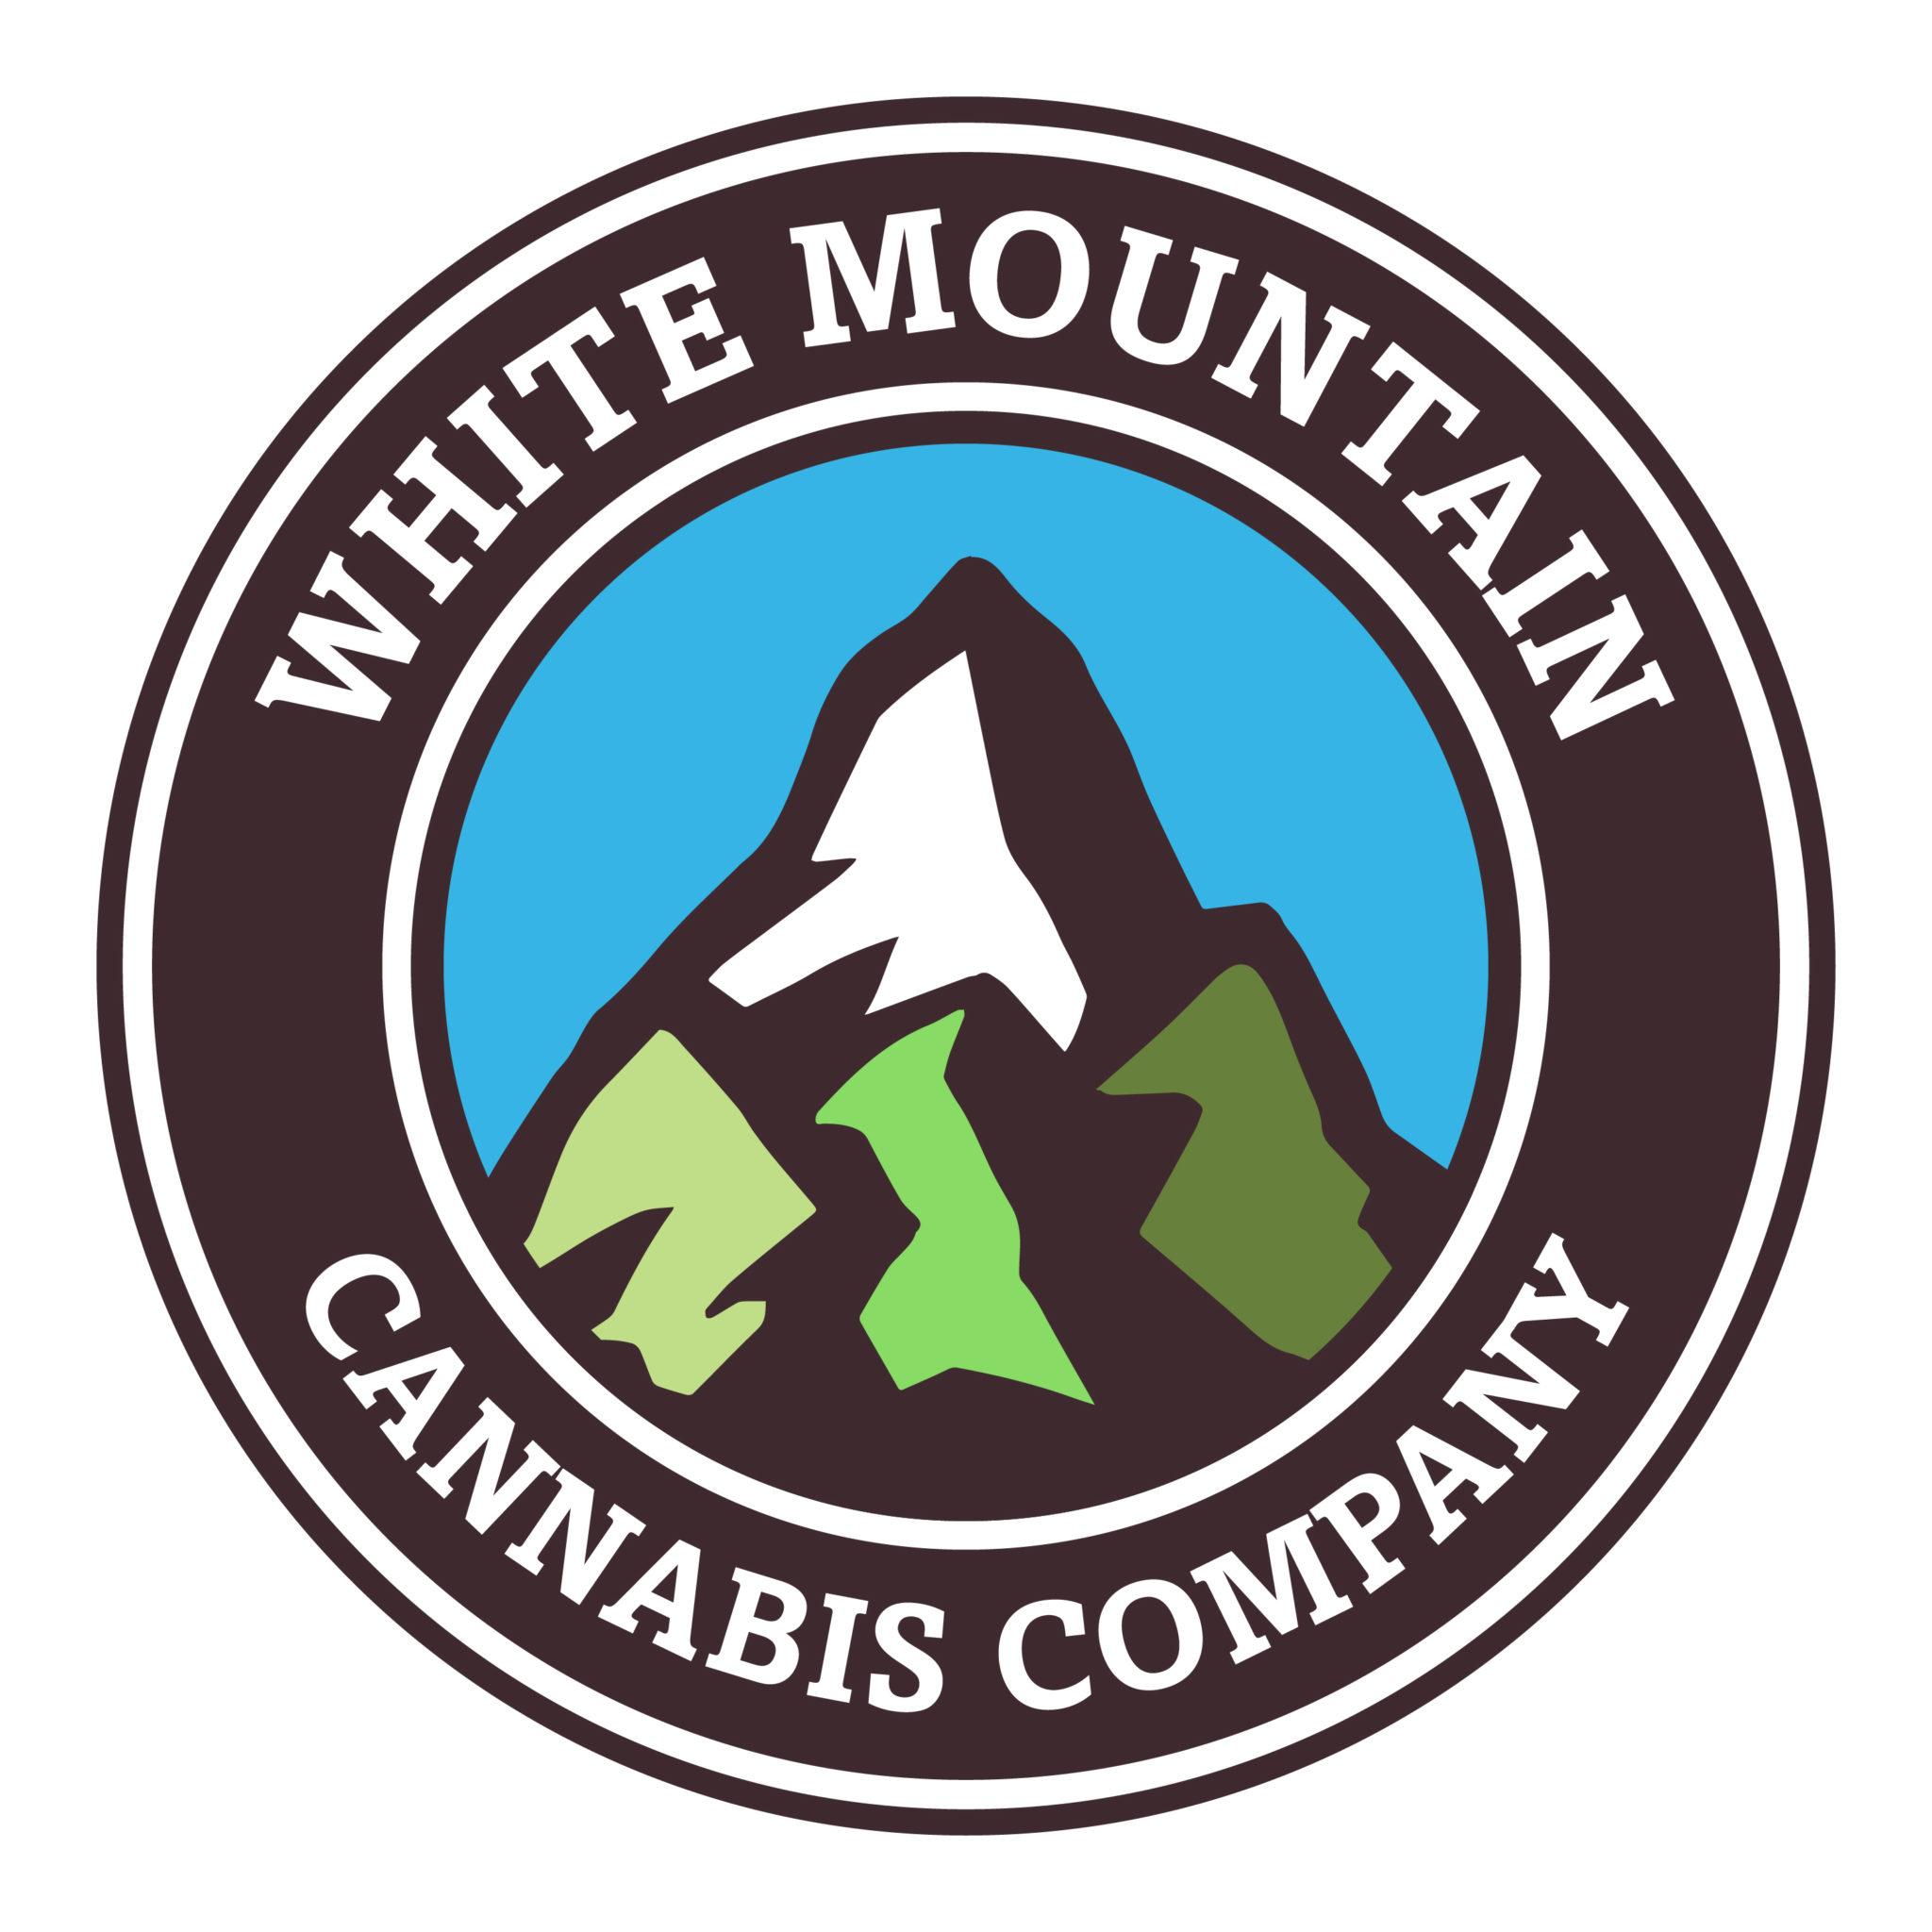 Blue and White Mountain Logo - White Mountain Cannabis Company - CannaPlanners